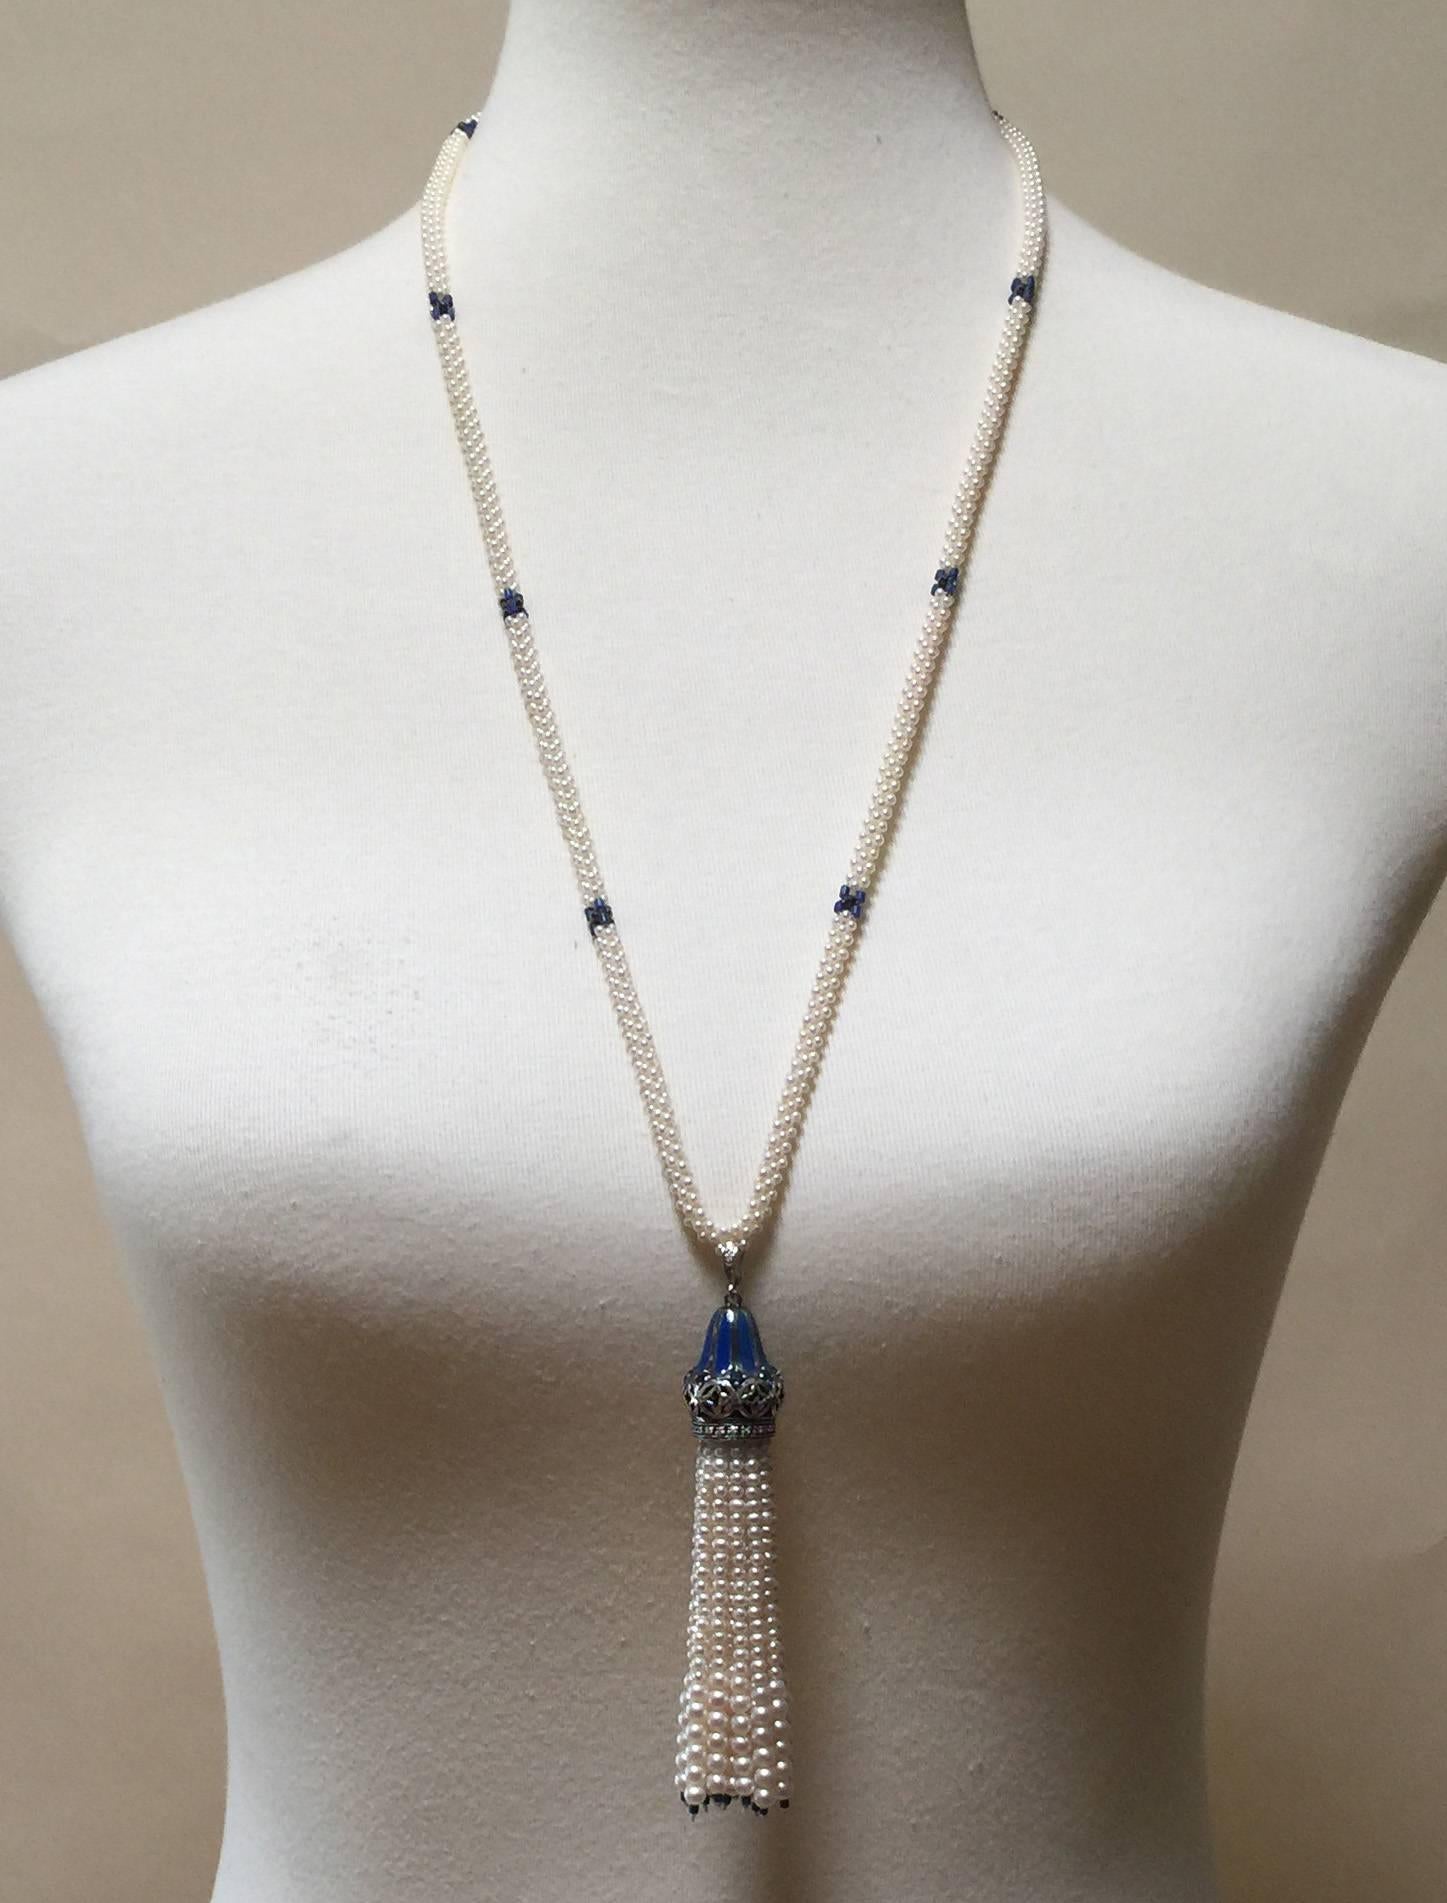 Brilliant Cut Marina J  Woven Long Pearl Necklace with Hand made Graduated Tassle with Enamel 